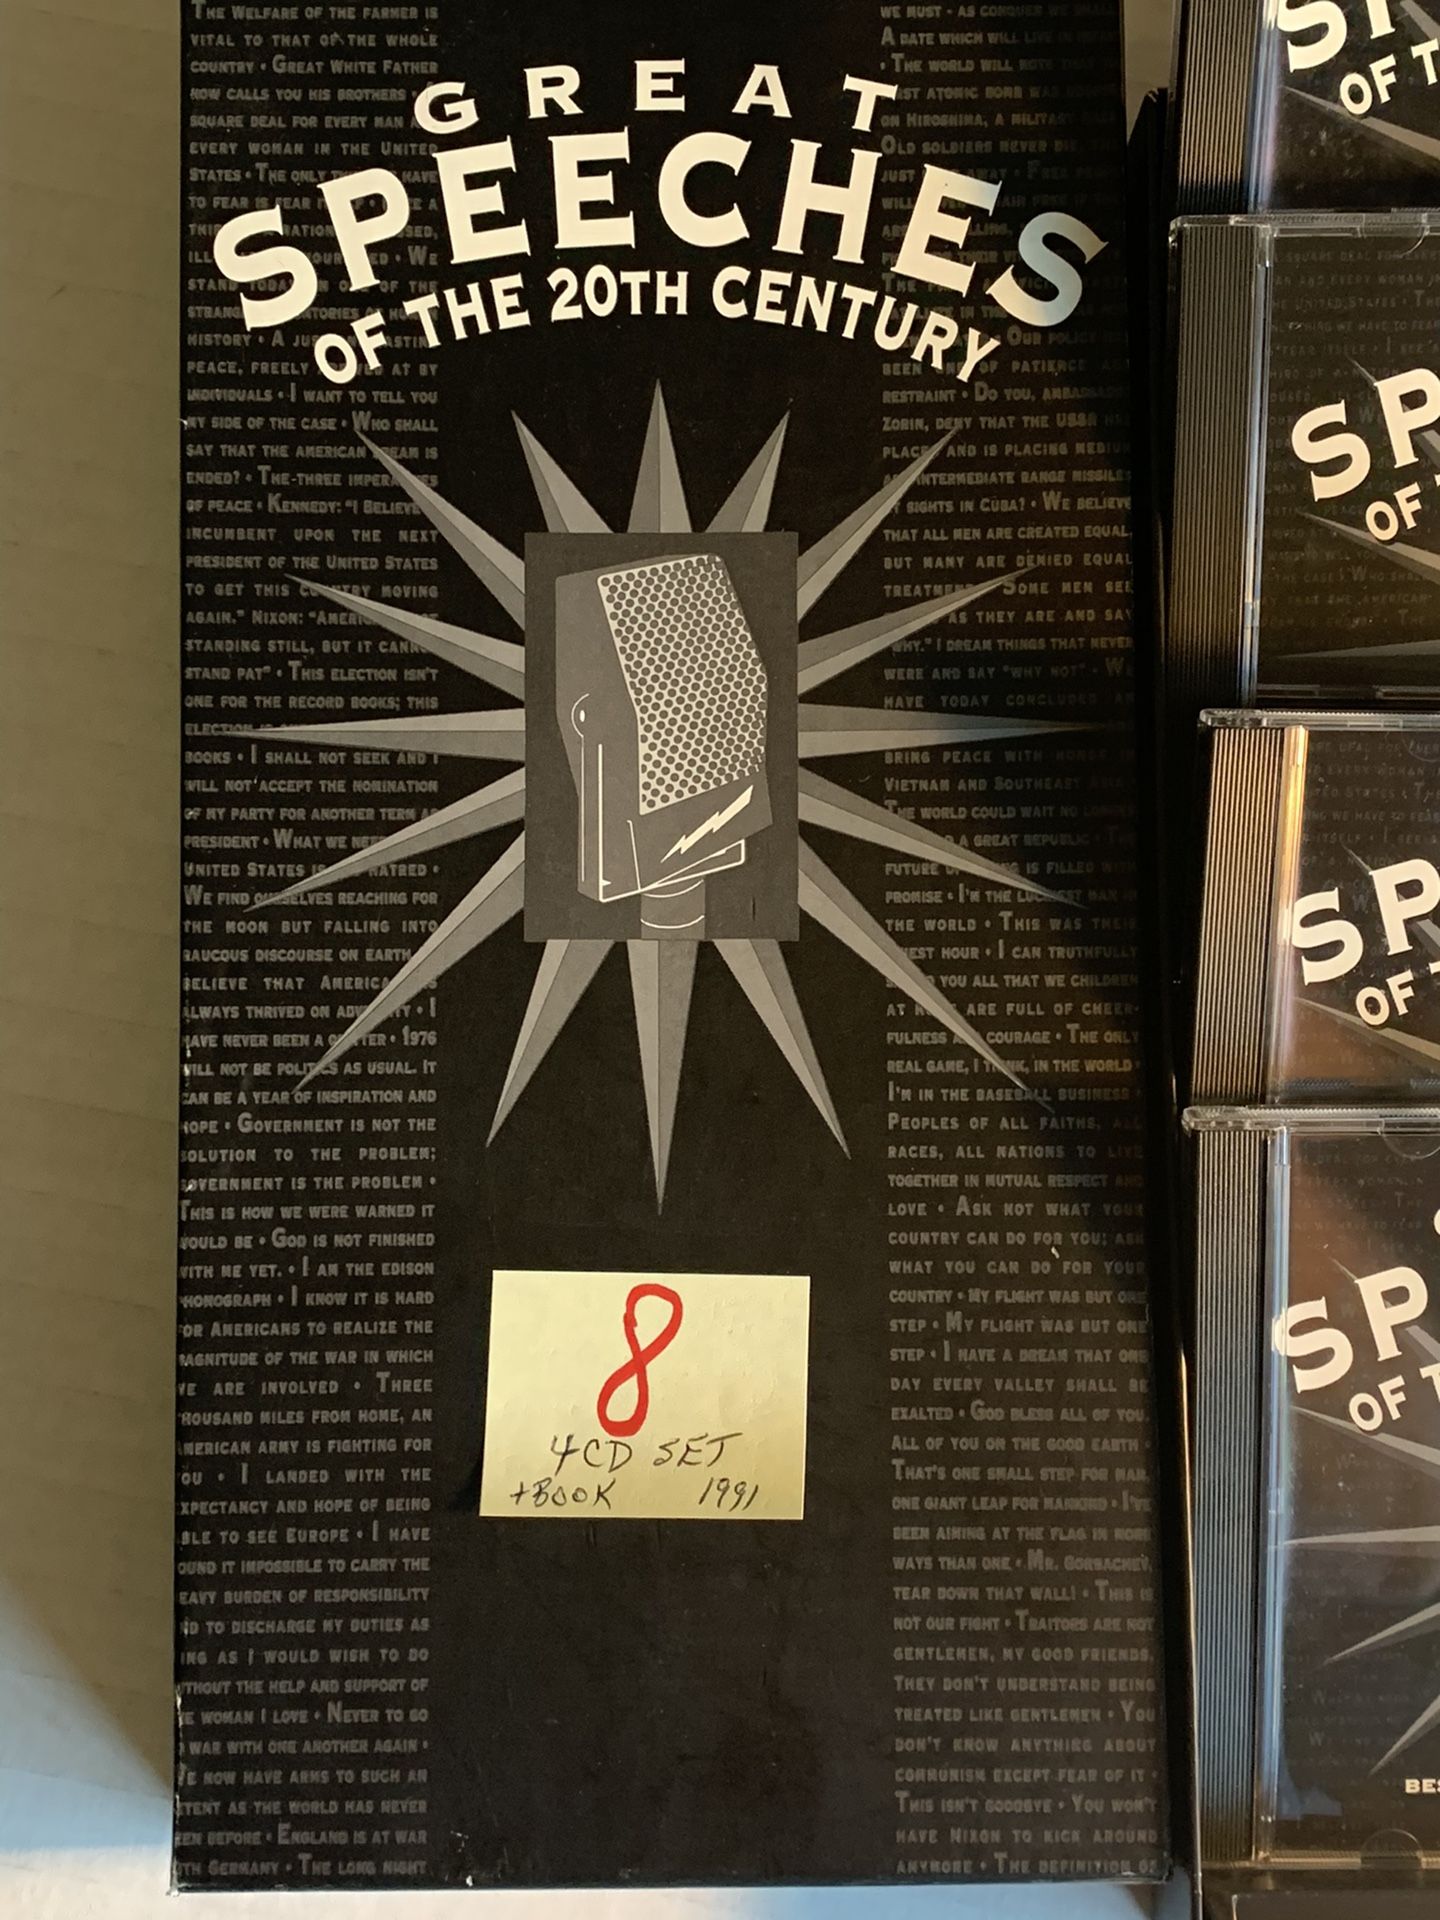 Now $4!! Great Speeches of the 20th Century 4 CD Set w/Book